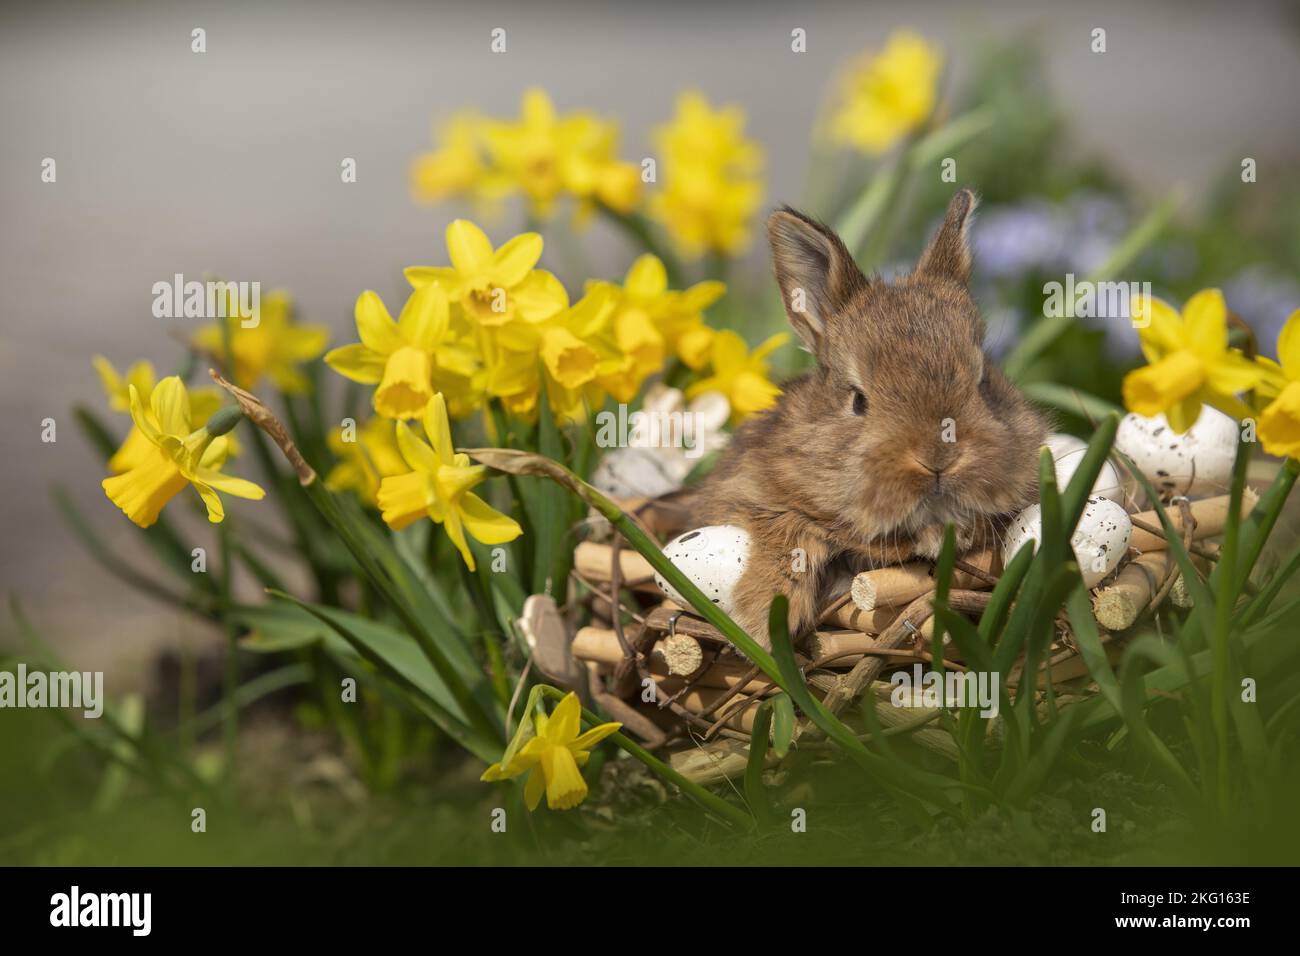 young rabbit between blossoms Stock Photo